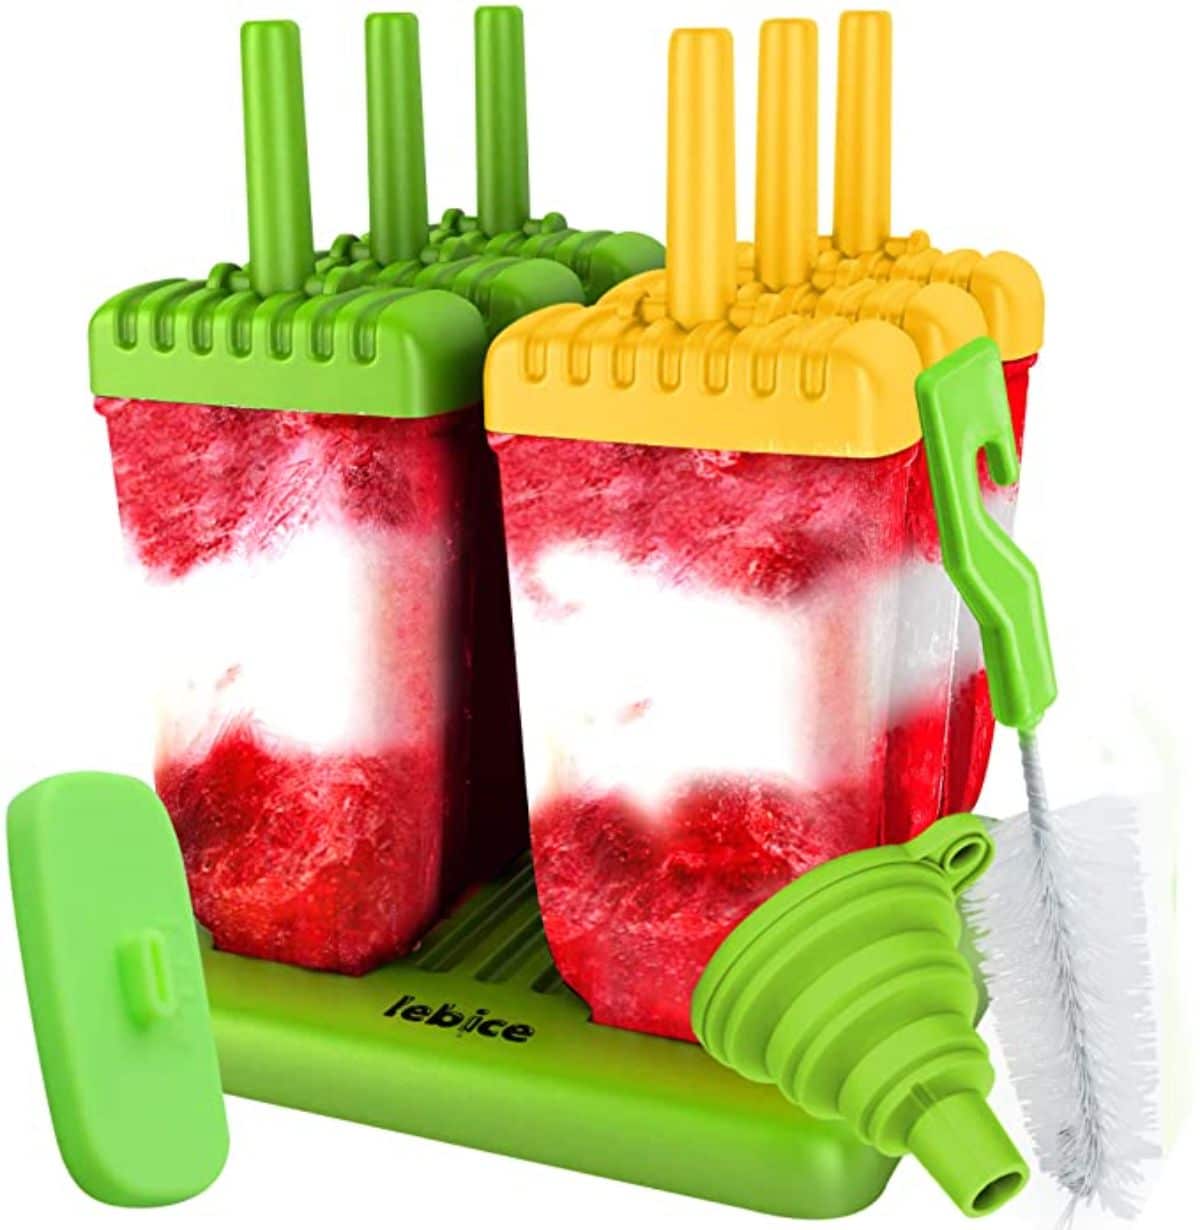 a popsicle maker in green and yellow with 4 popsicles in it